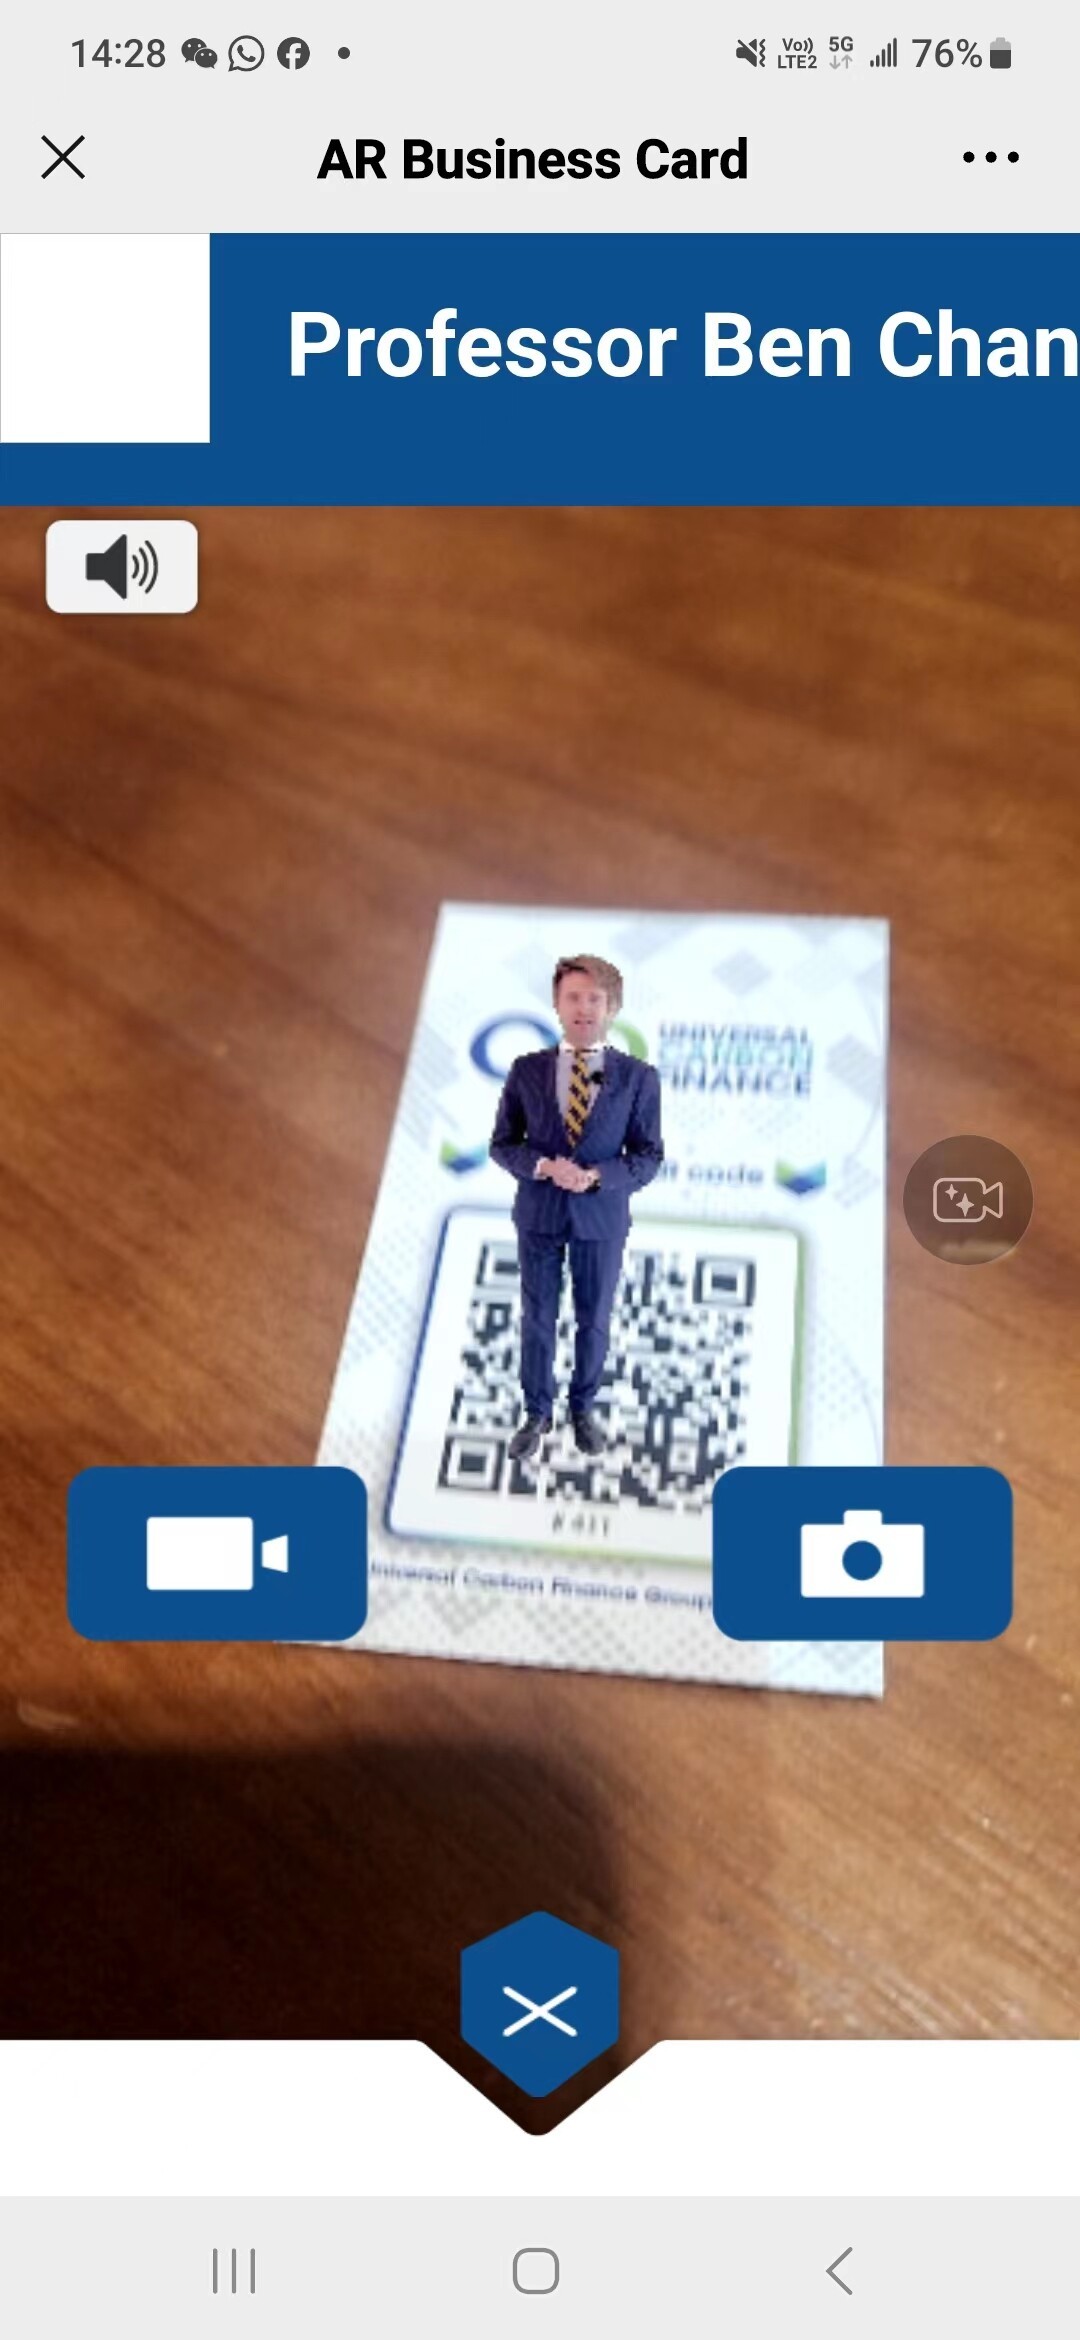 PHP能不能整‘AR Business Card’？